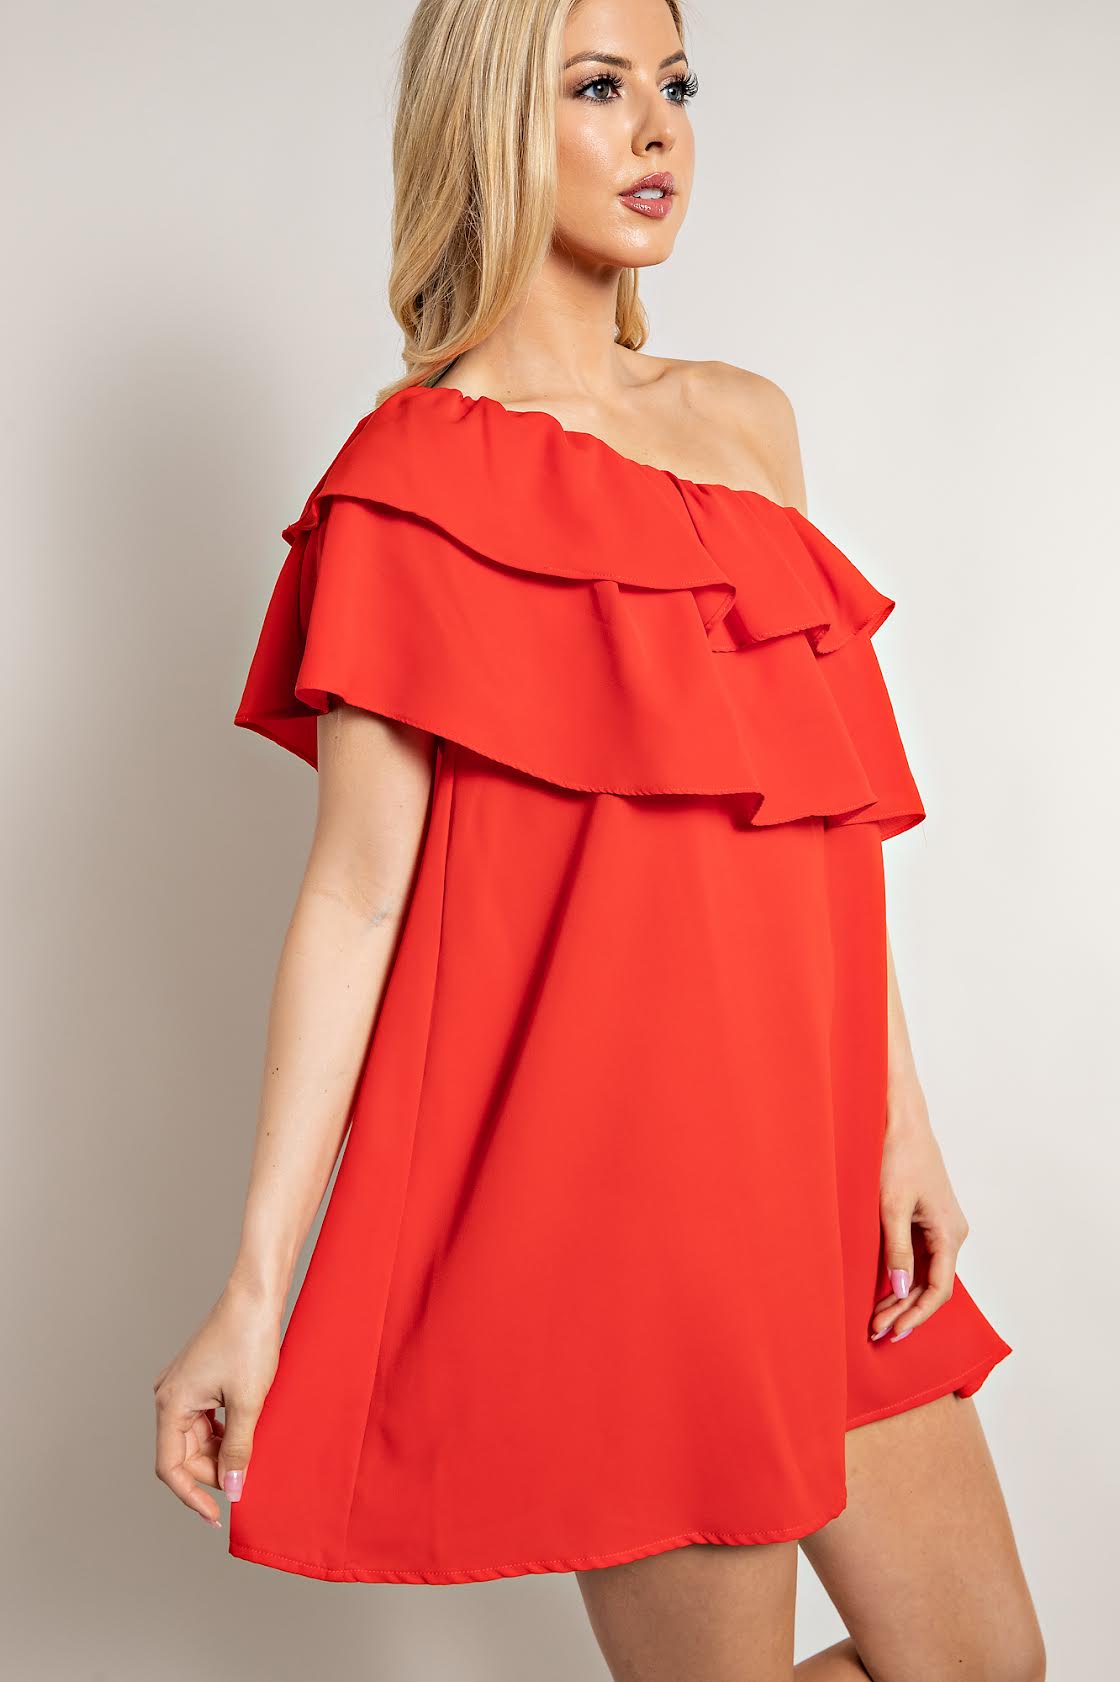 One Shoulder Ruffled RED Tunic/Dress